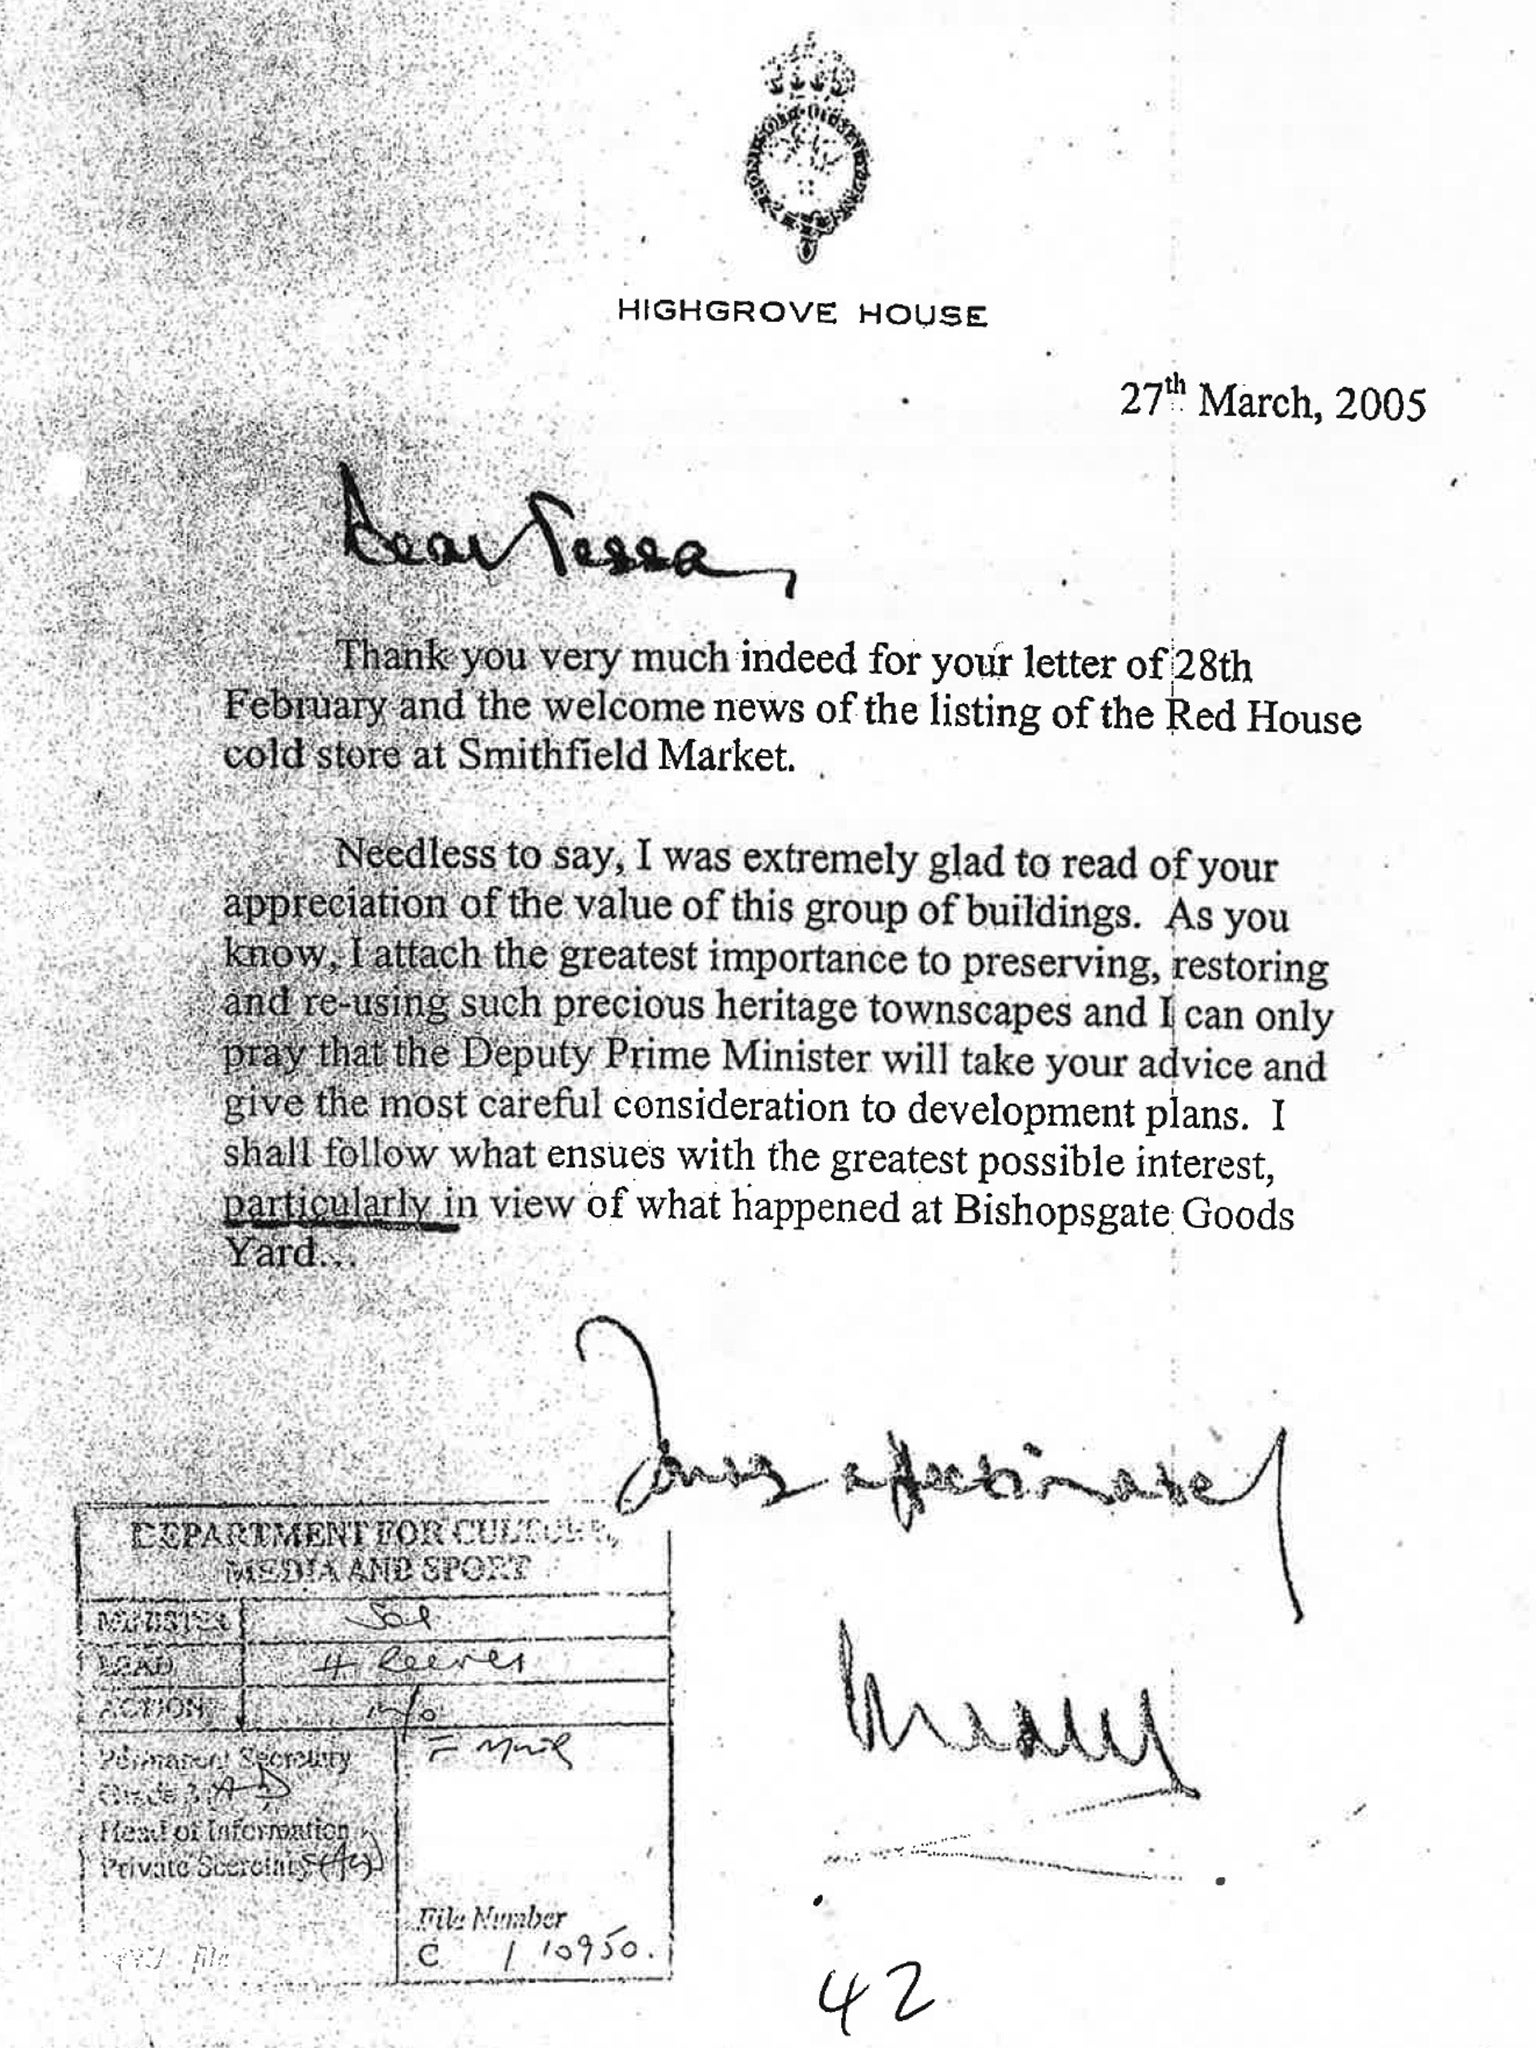 A letter Prince Charles wrote to then Culture Secretary Tessa Jowell in March 2005